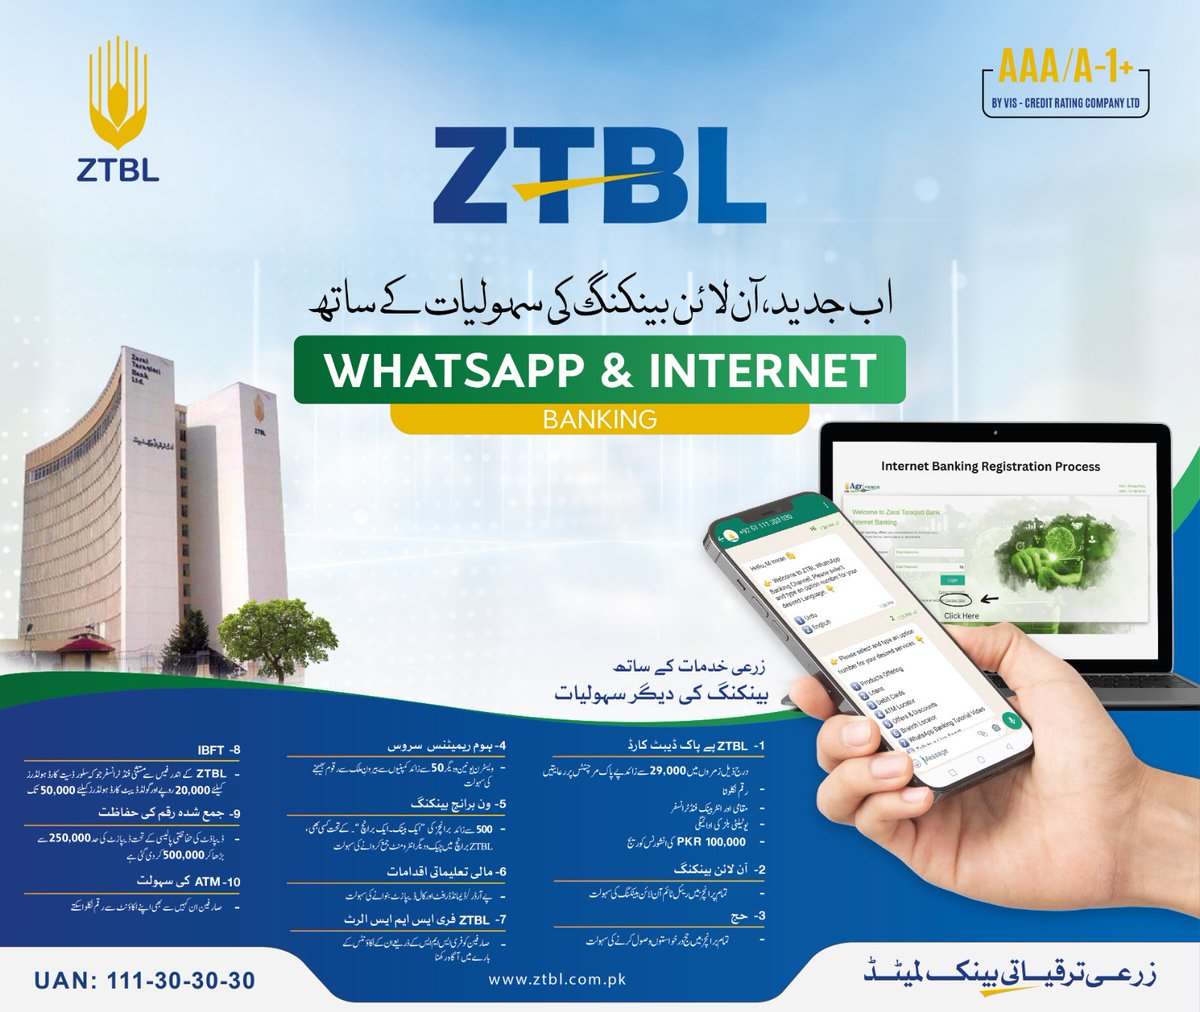 Empowering our customers with WhatsApp and Internet Banking. ZTBL is a complete bank having its presence in each nook and corner of Pakistan. 
#ZTBL #WhatsAppBanking #InternetBanking #CompleteBank #ZaraiTaraqiatiBankLtd